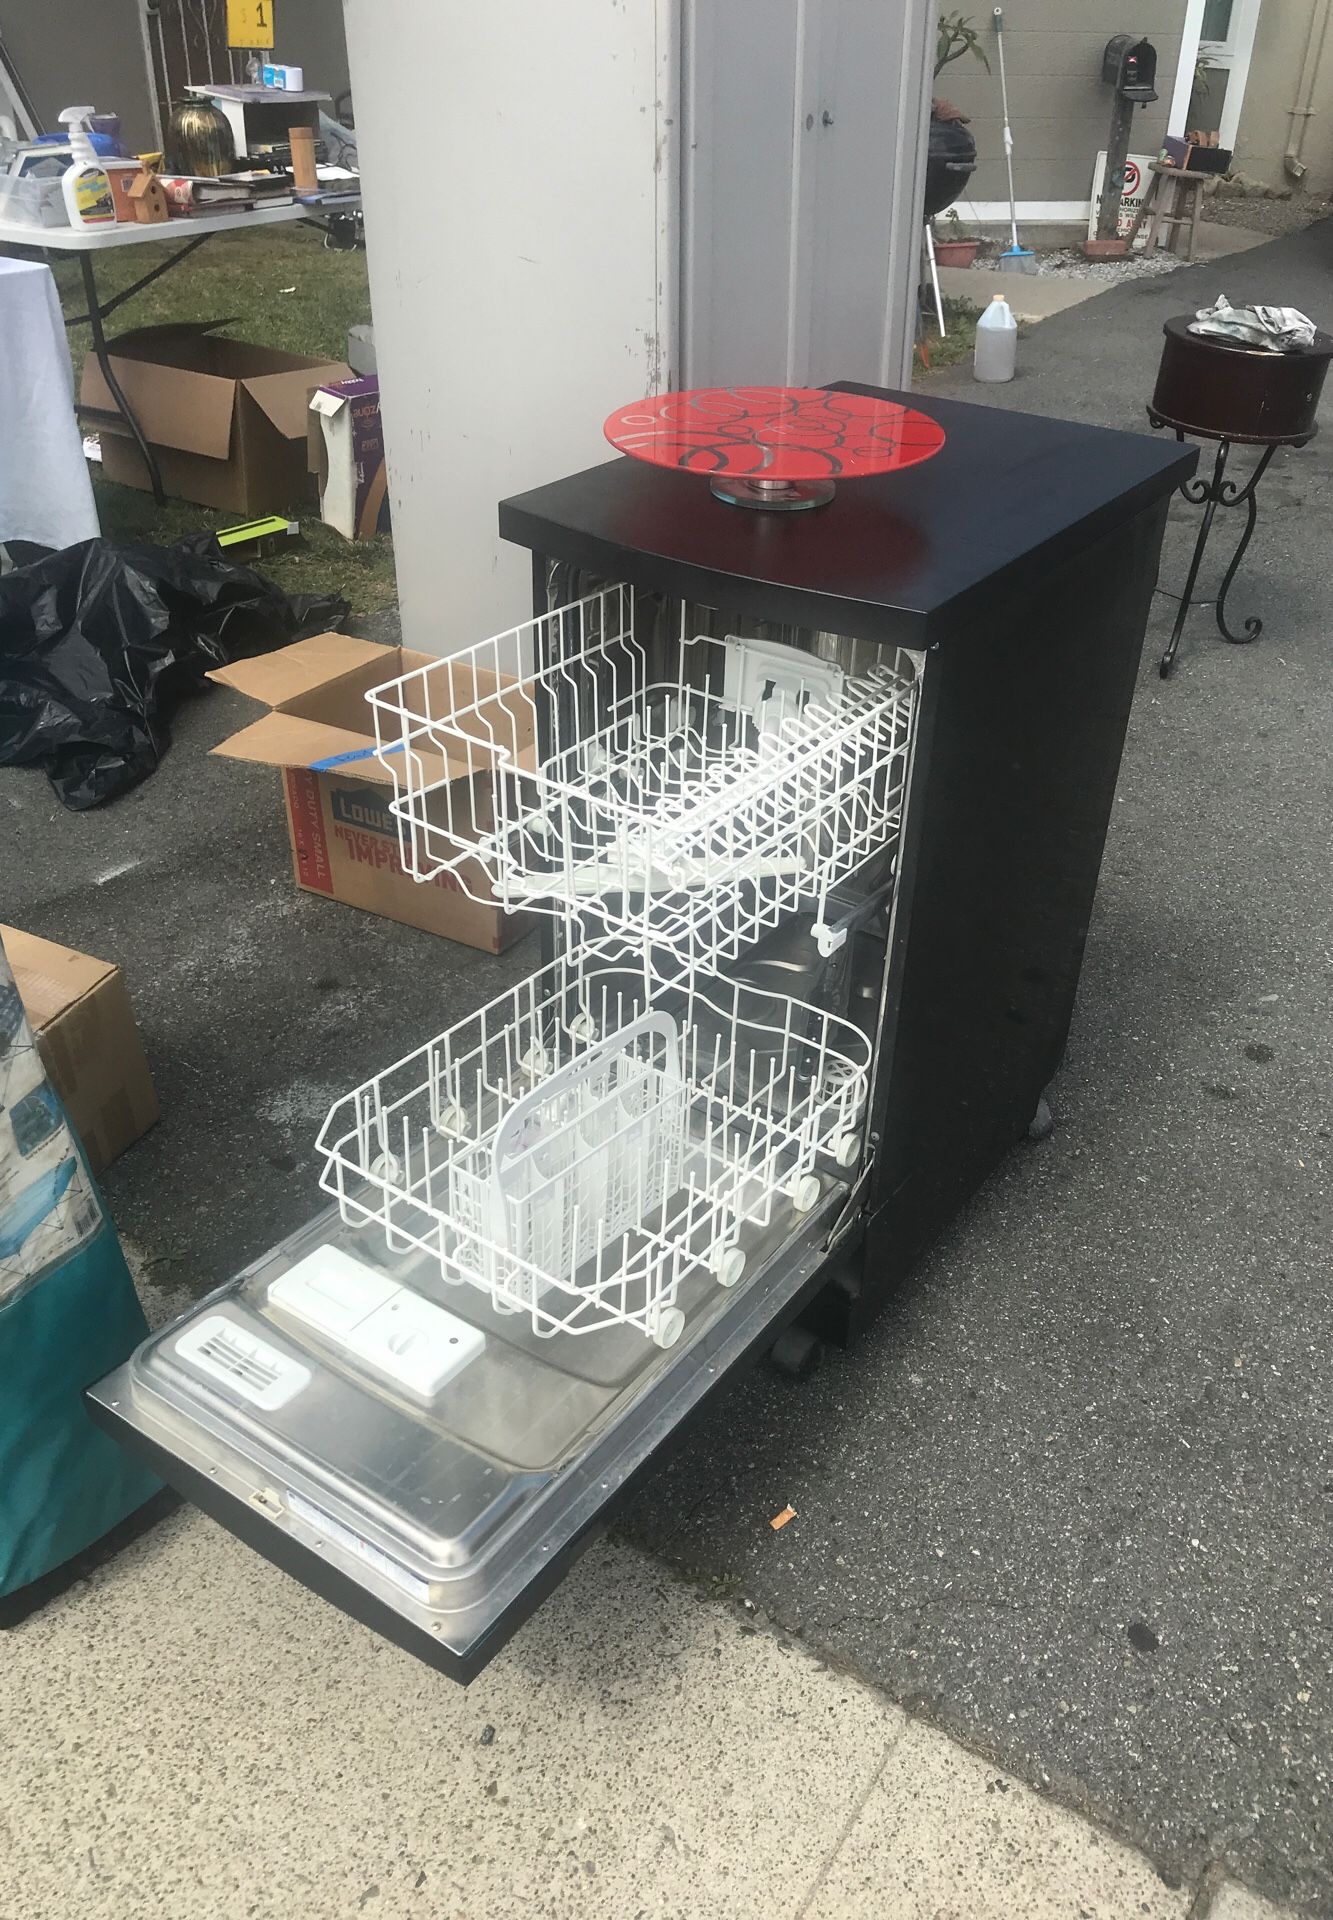 Kenmore dish washer for apt (mobile)